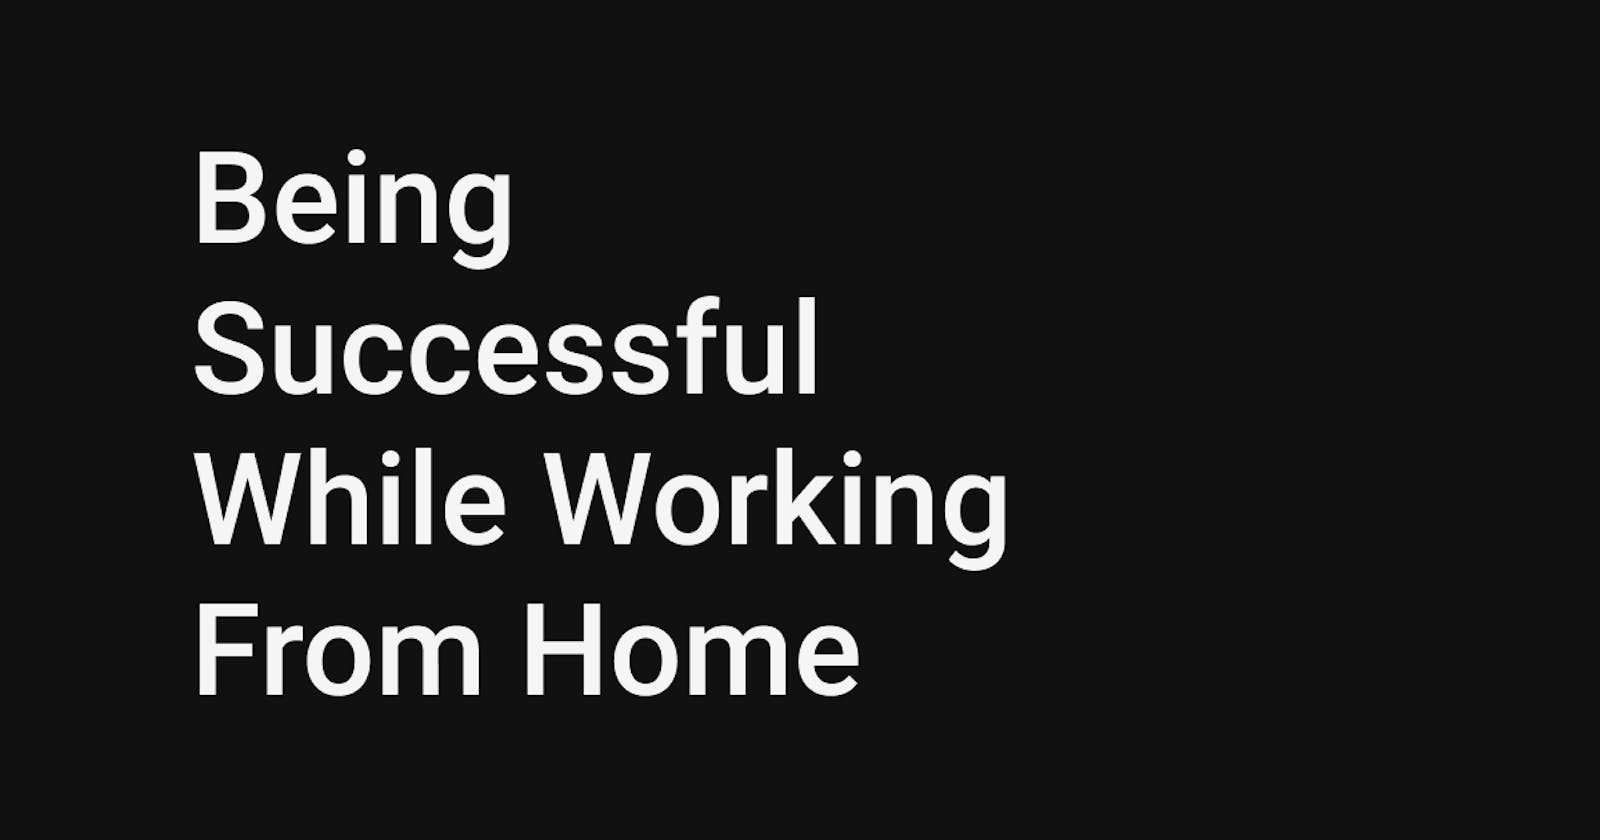 Being Successful While Working From Home